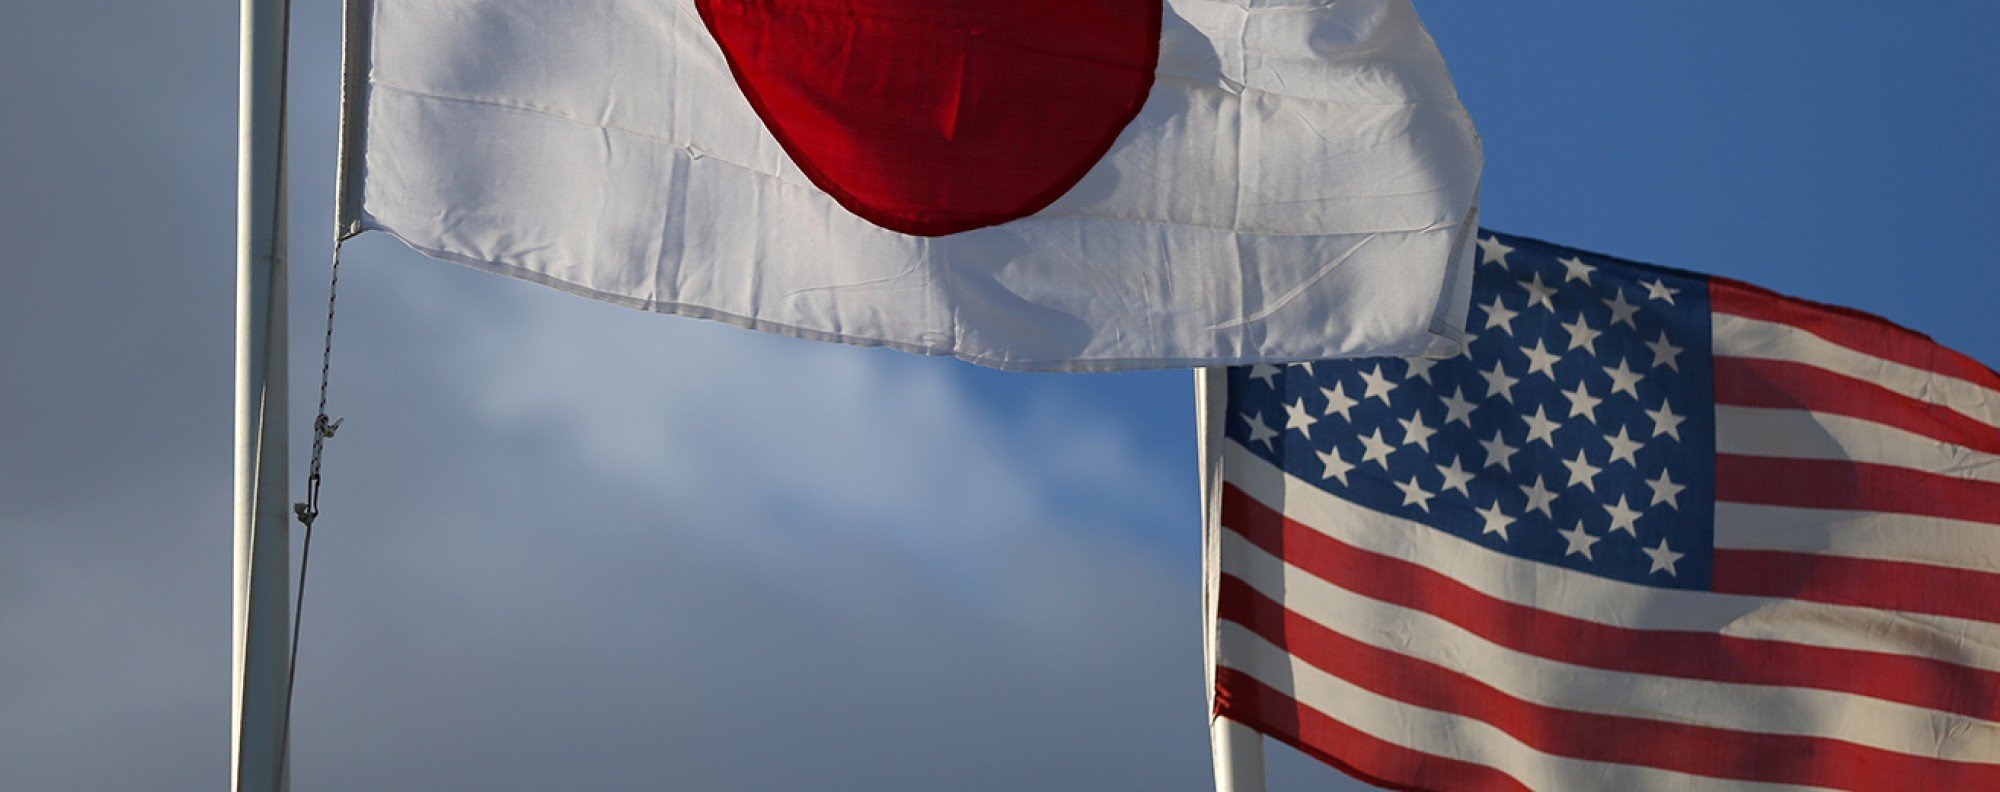 The flags of Japan and the United States. Photo: Getty